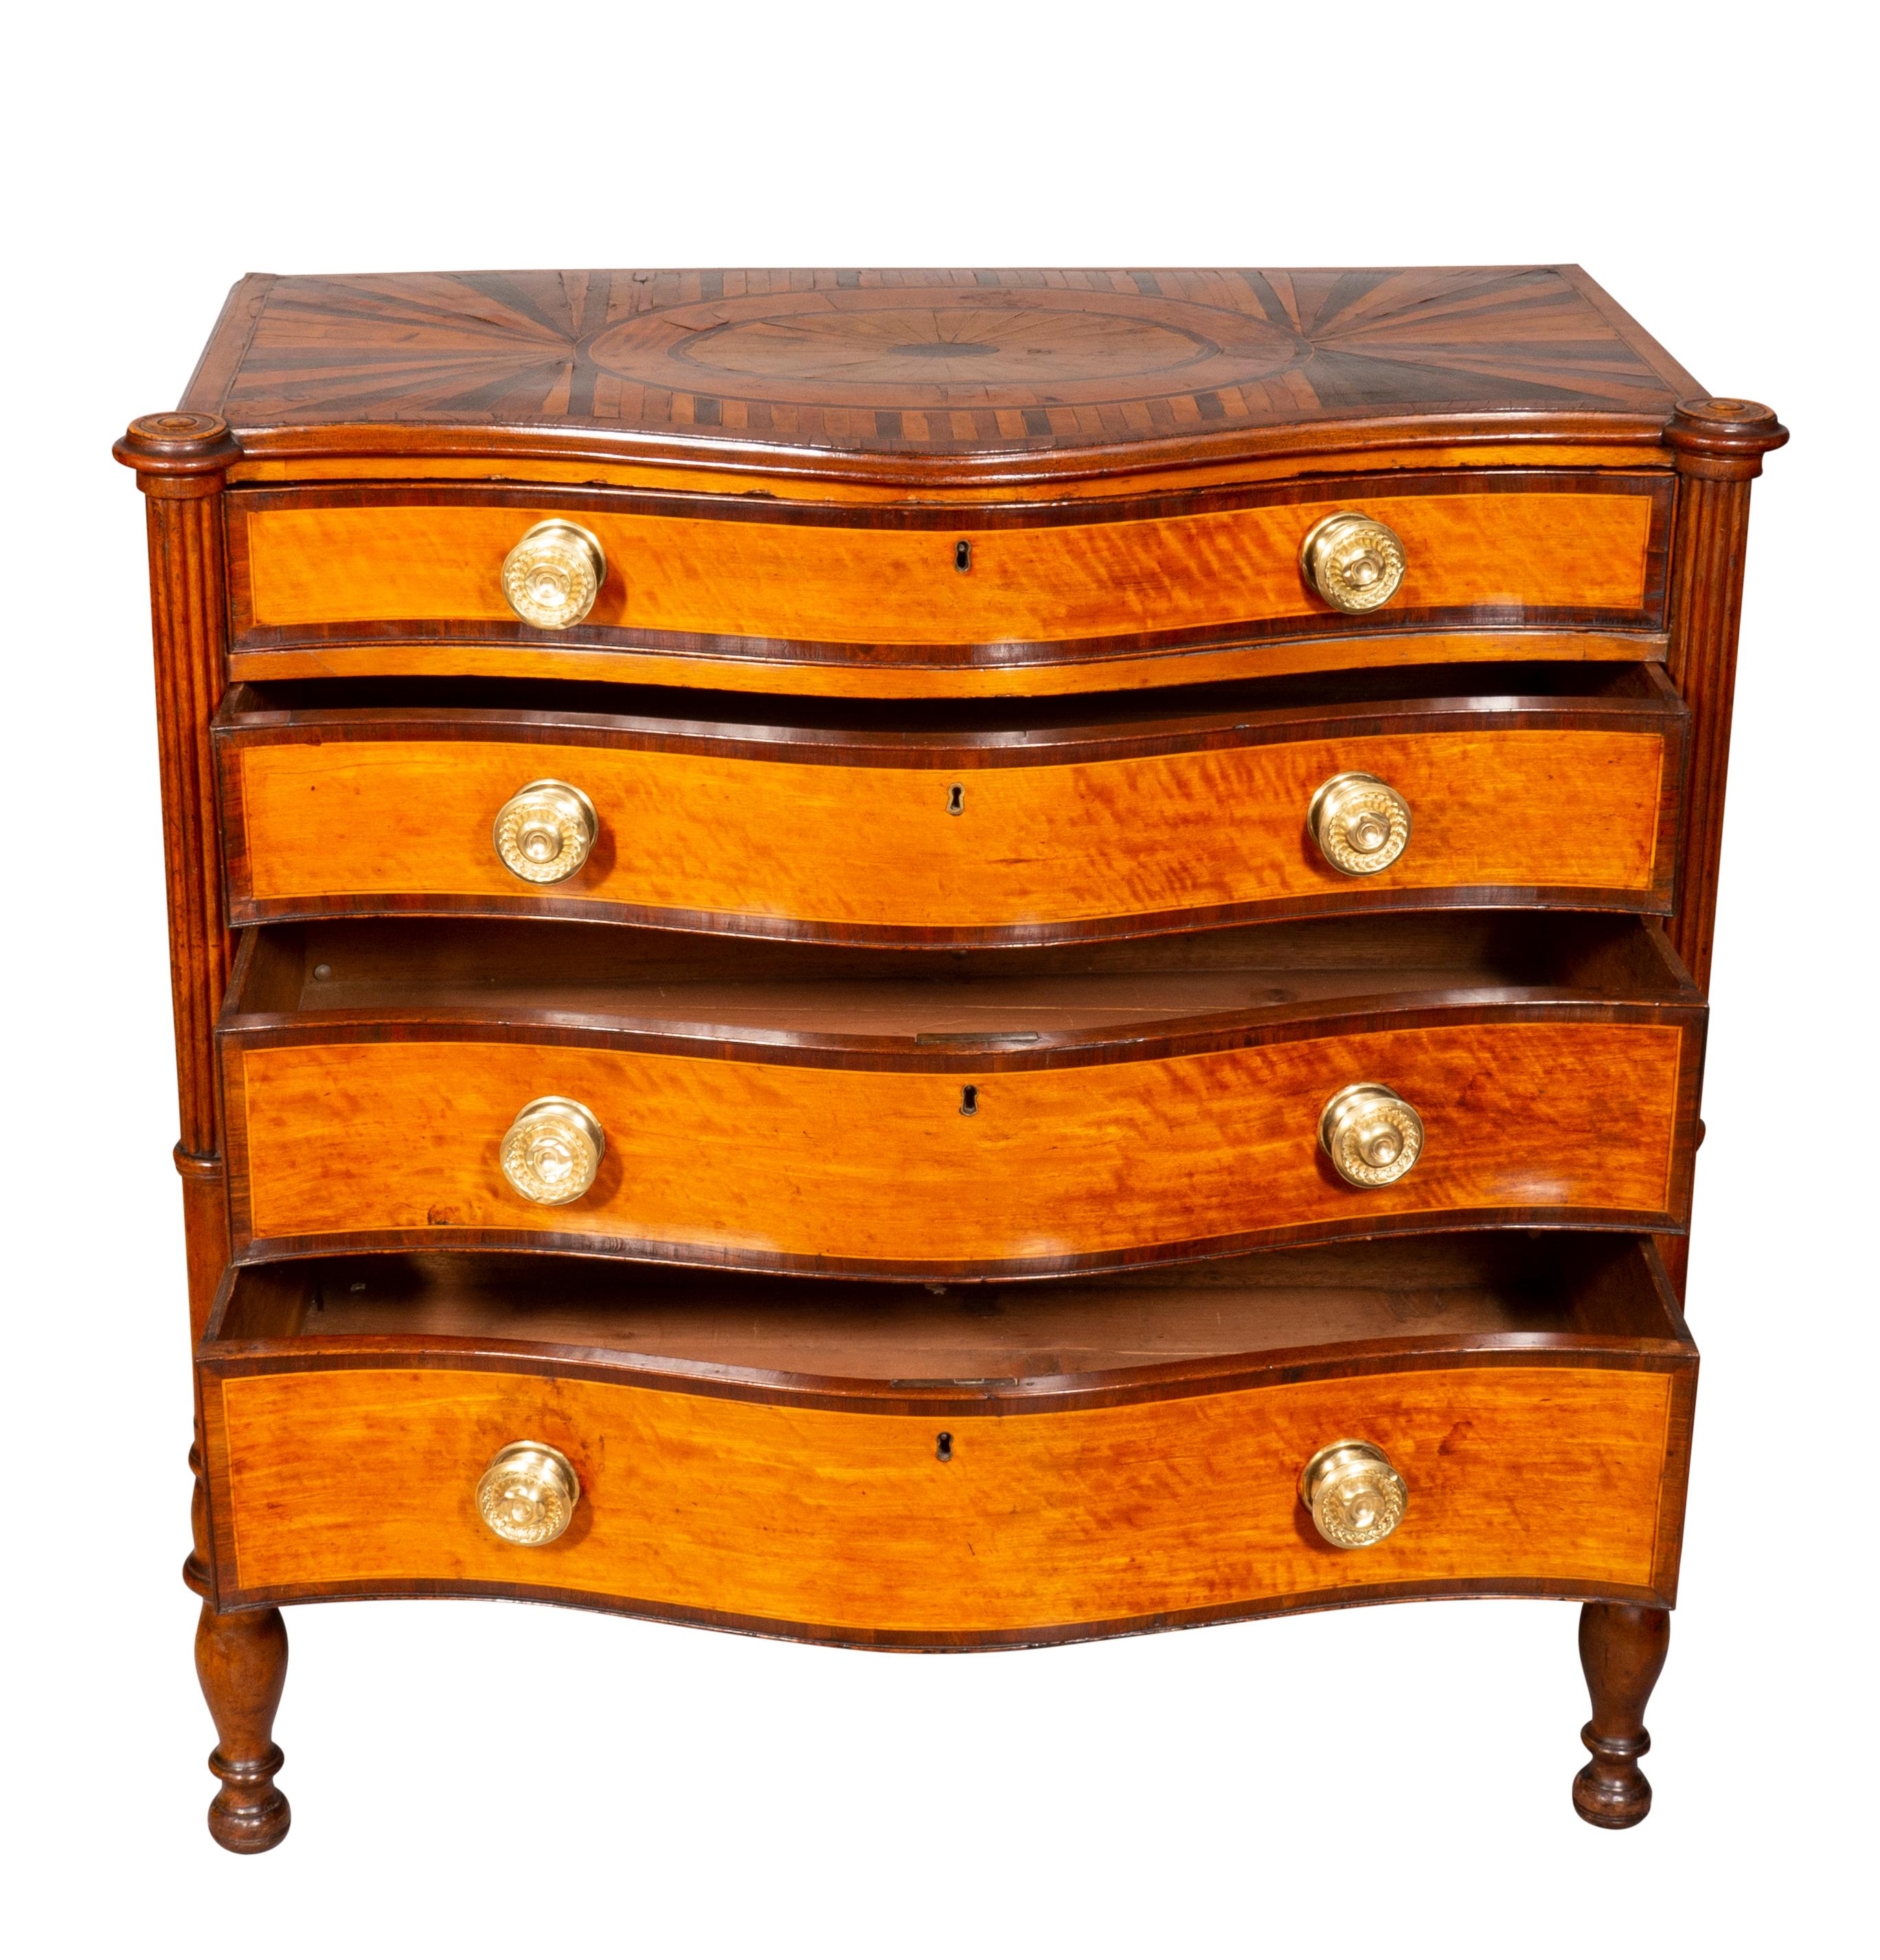 Early 19th Century Regency Parquetry and Exotic Wood Chest of Drawers For Sale